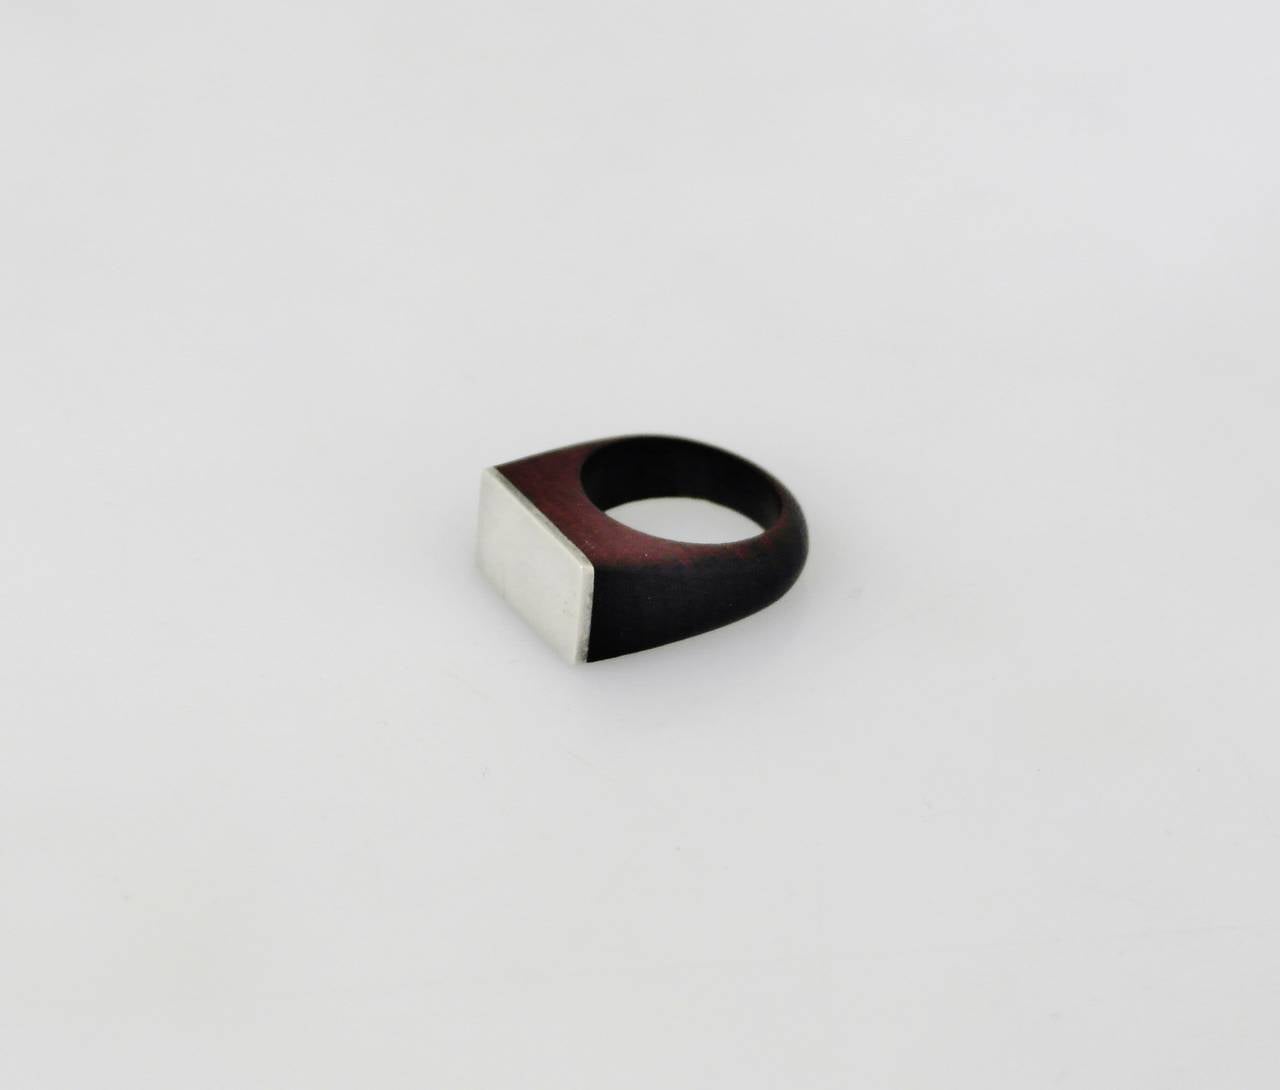 Being offered is a circa 1953 ring by William Spratling of Taxco, Mexico; made during his third design period (1951-1967). Sterling silver layer applied to a carved rosewood ring. Size 8. Marked as illustrated. In excellent condition.

Stanley